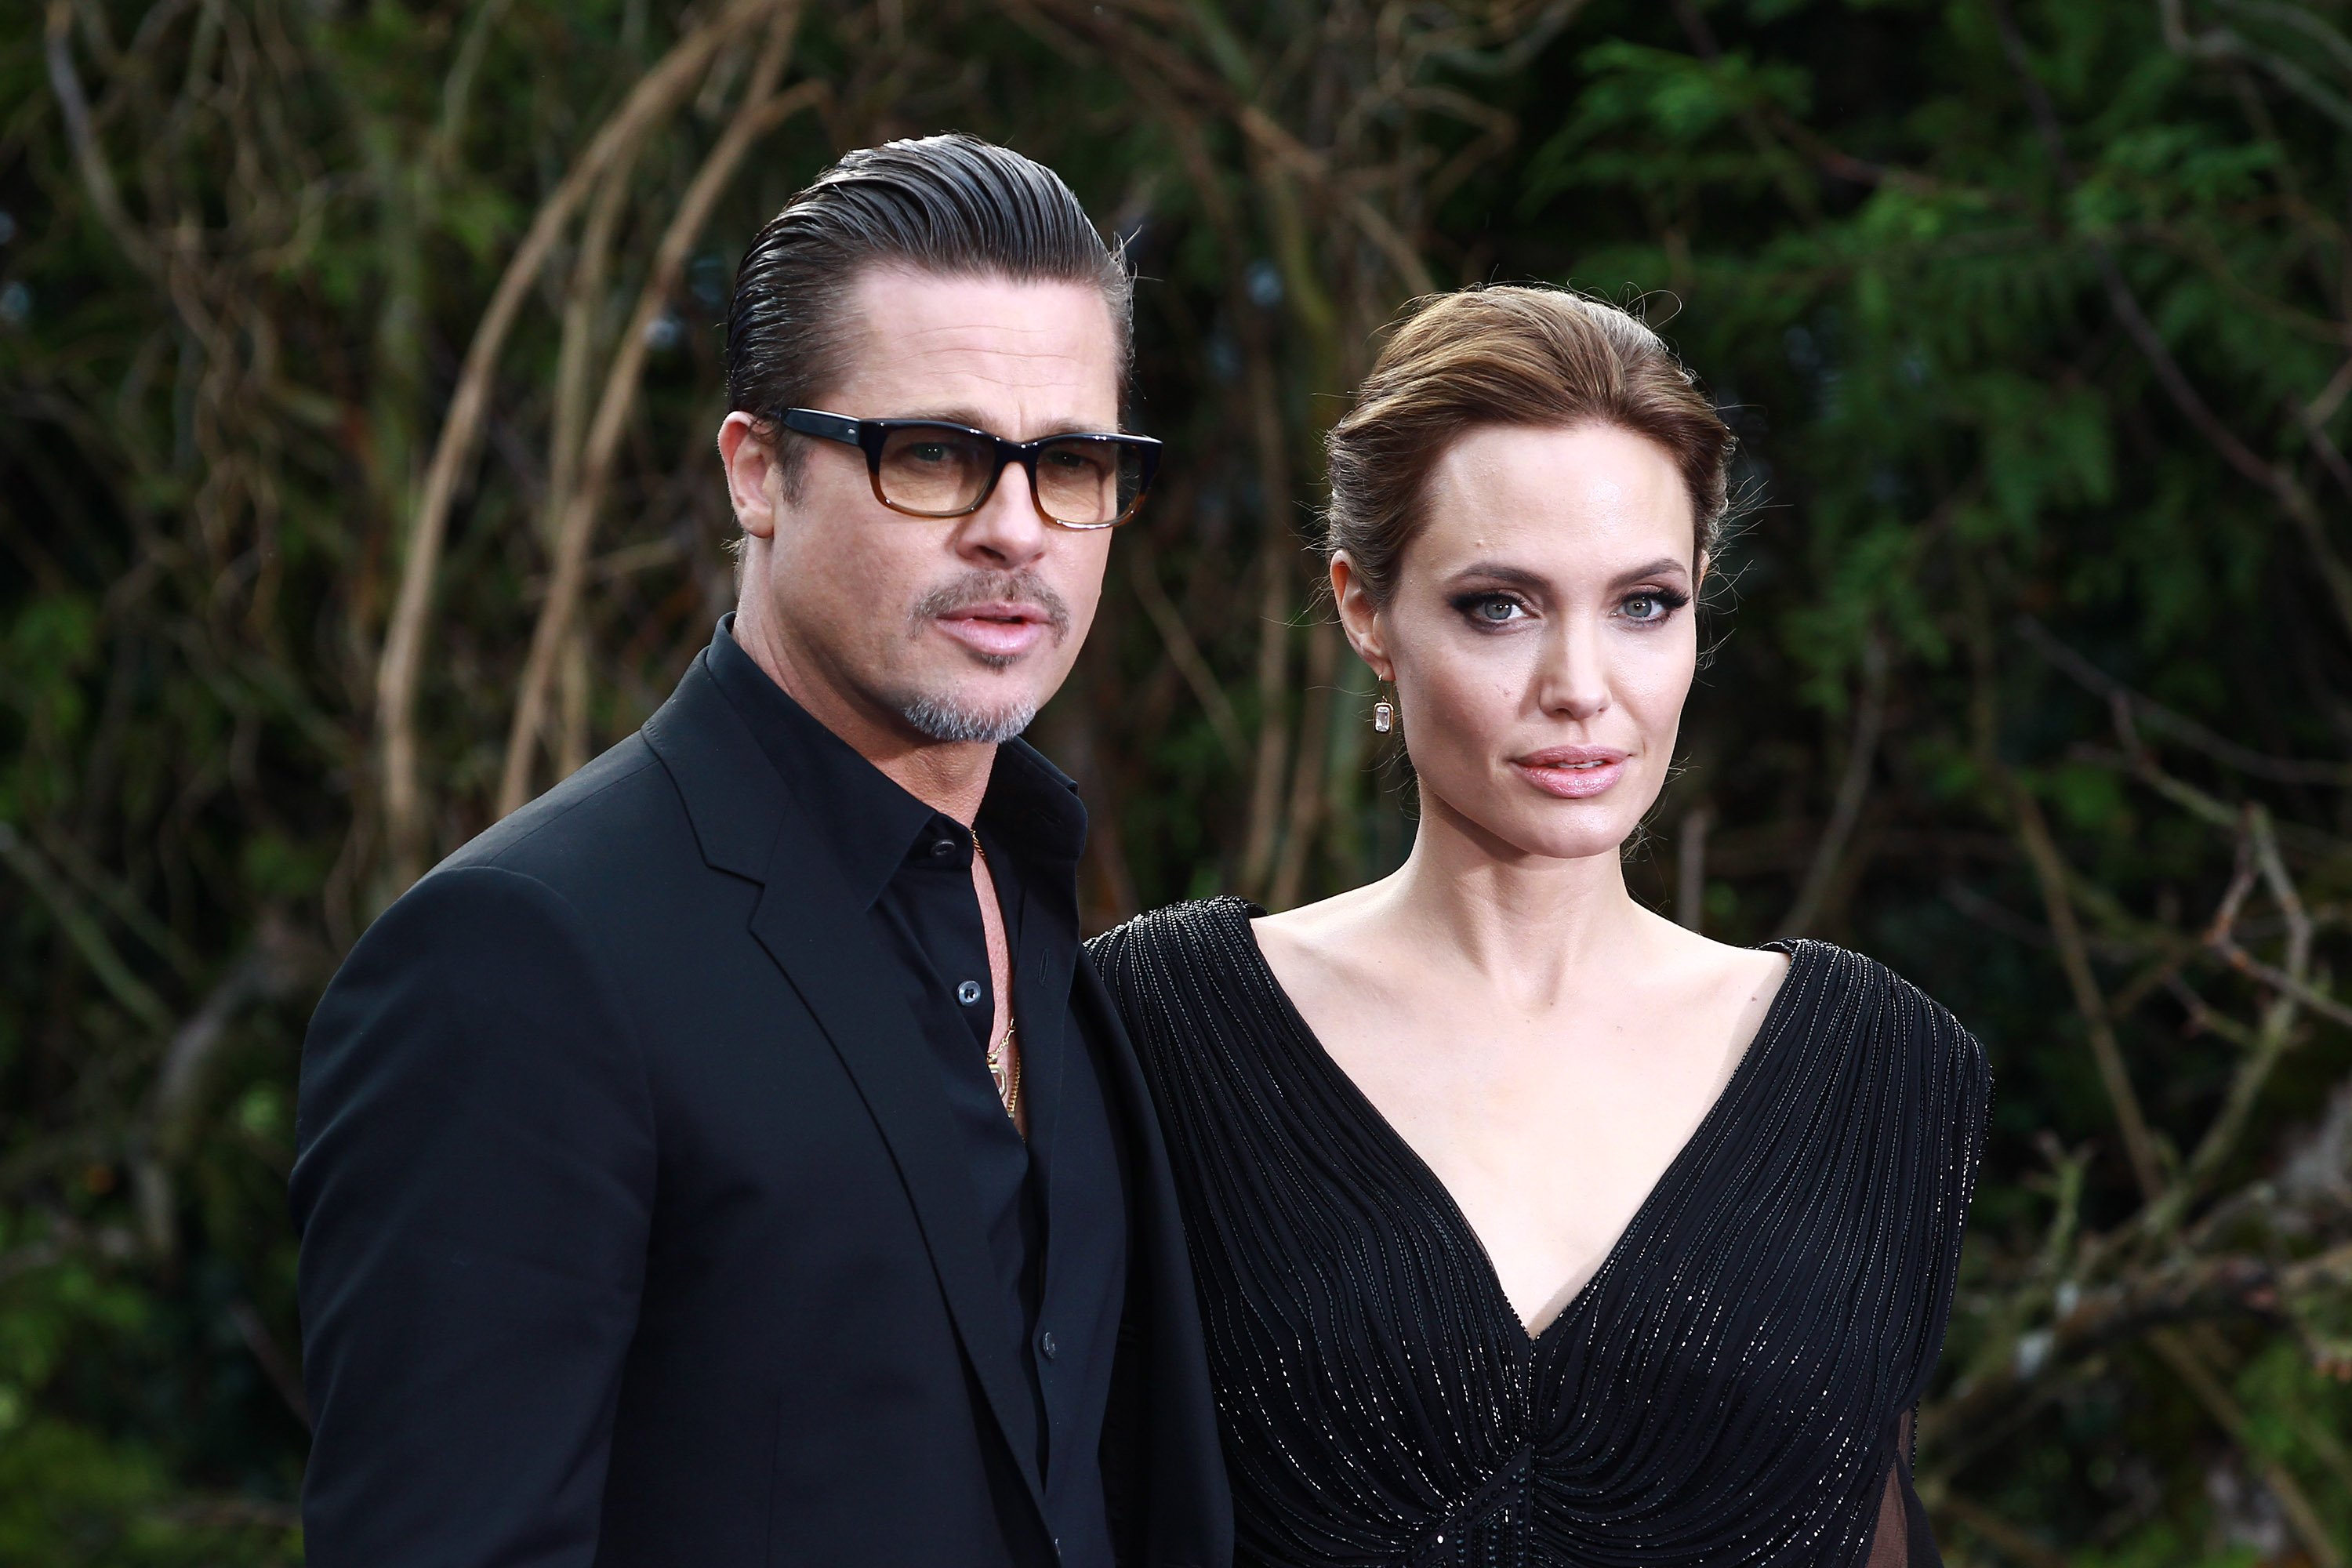 Brad Pitt and Angelina Jolie attend a private reception as costumes and props from Disney's "Maleficent" are exhibited in support of Great Ormond Street Hospital at Kensington Palace on May 8, 2014 in London, England. | Source: Getty Images